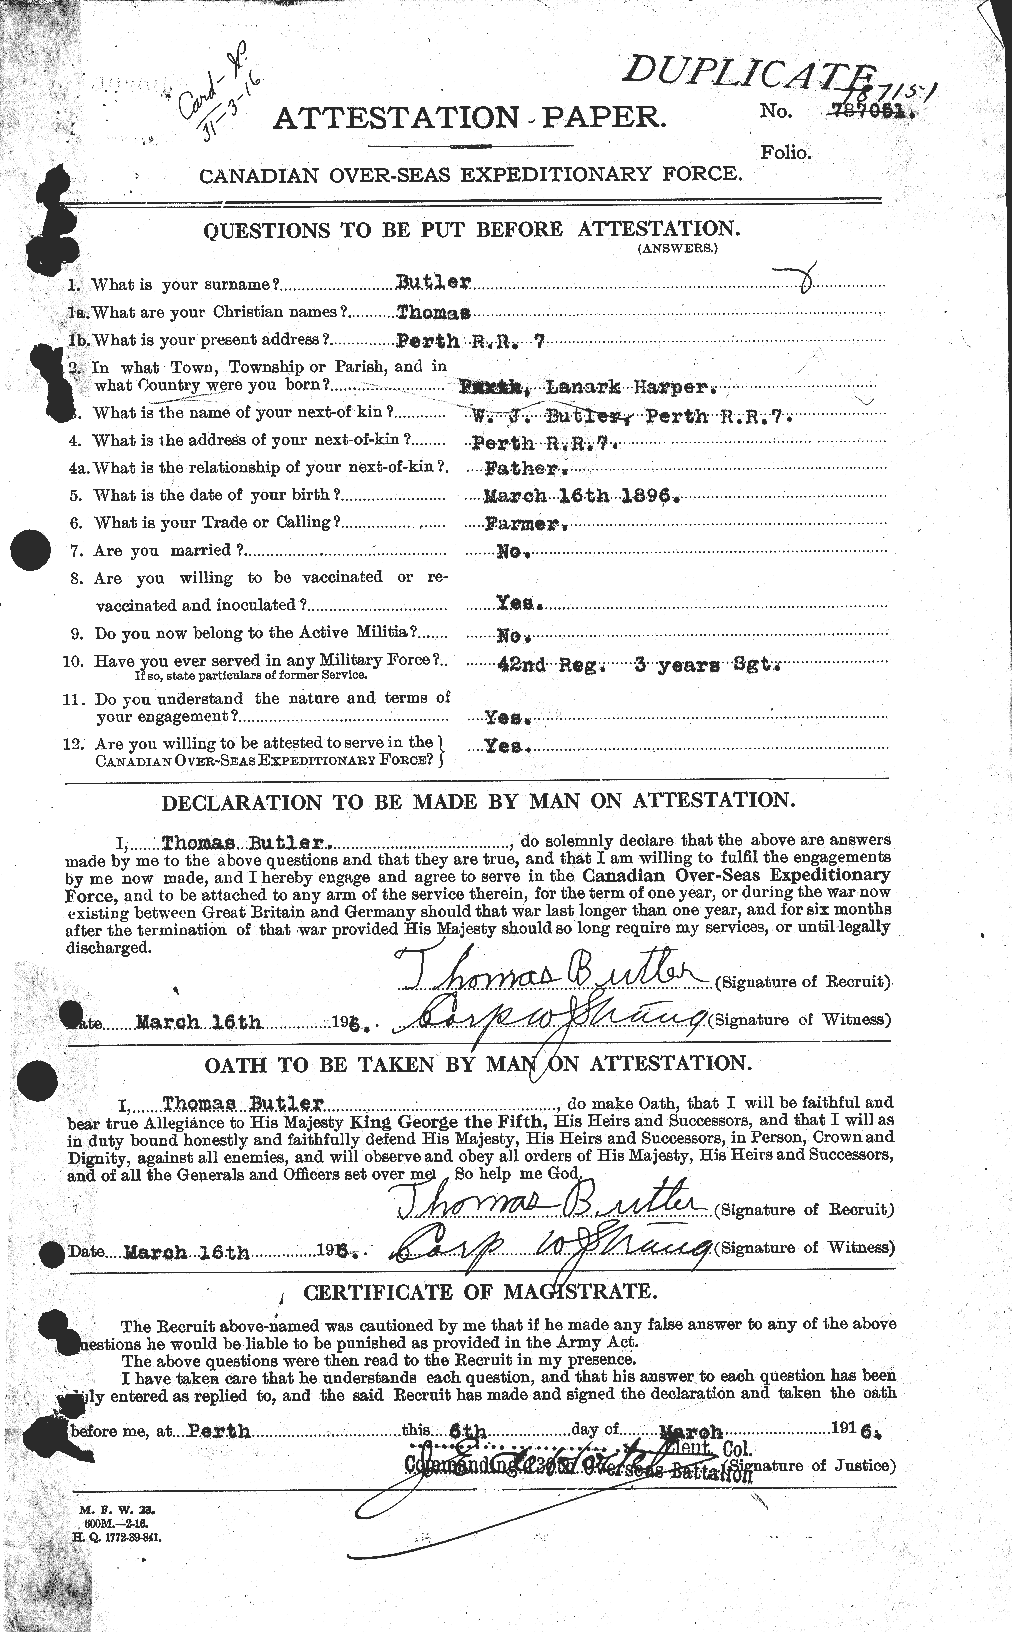 Personnel Records of the First World War - CEF 278064a